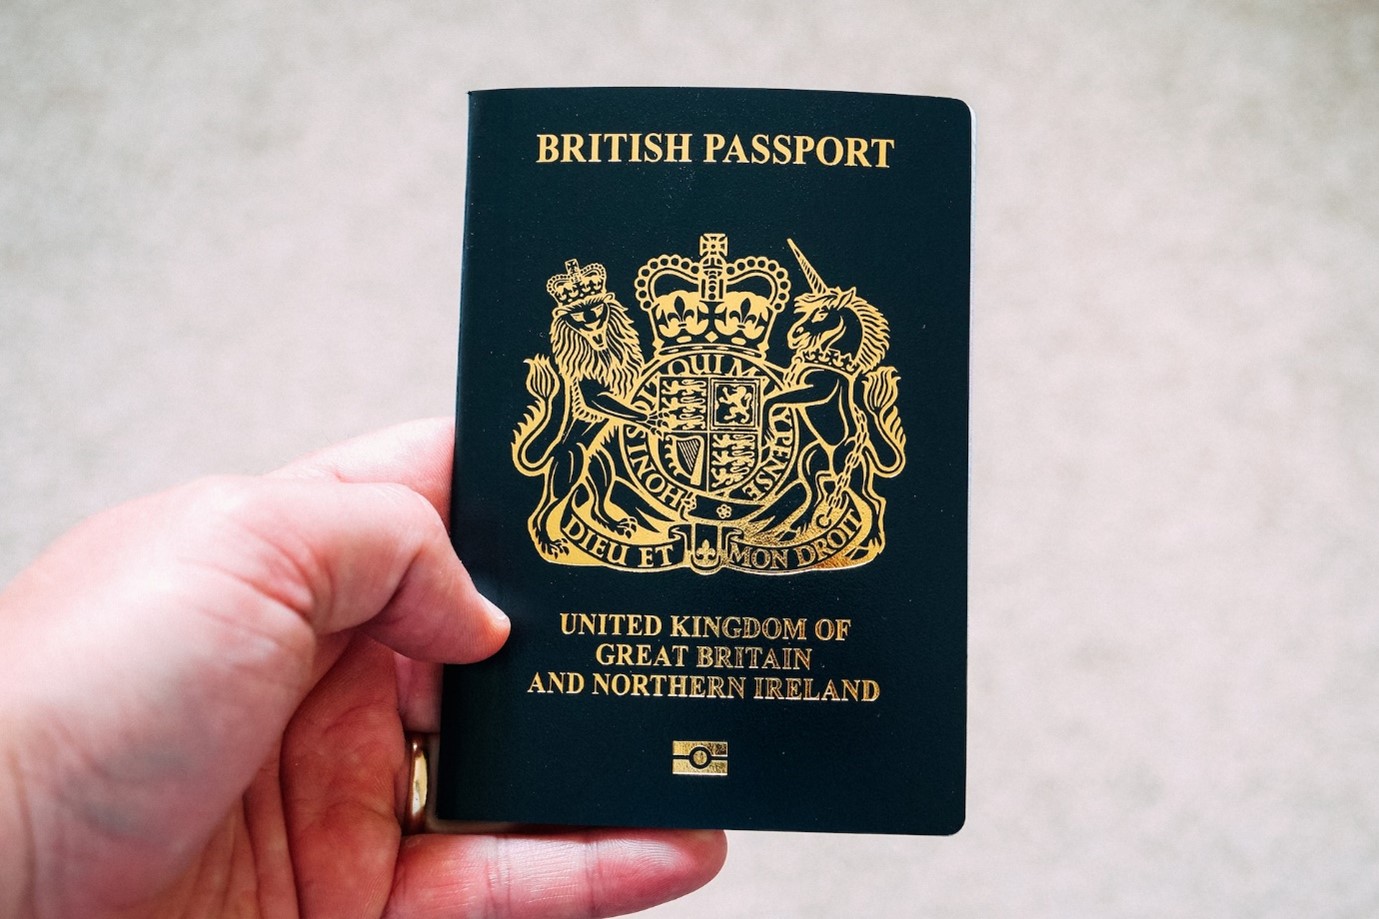 What should I do if my passport is lost or stolen while abroad?